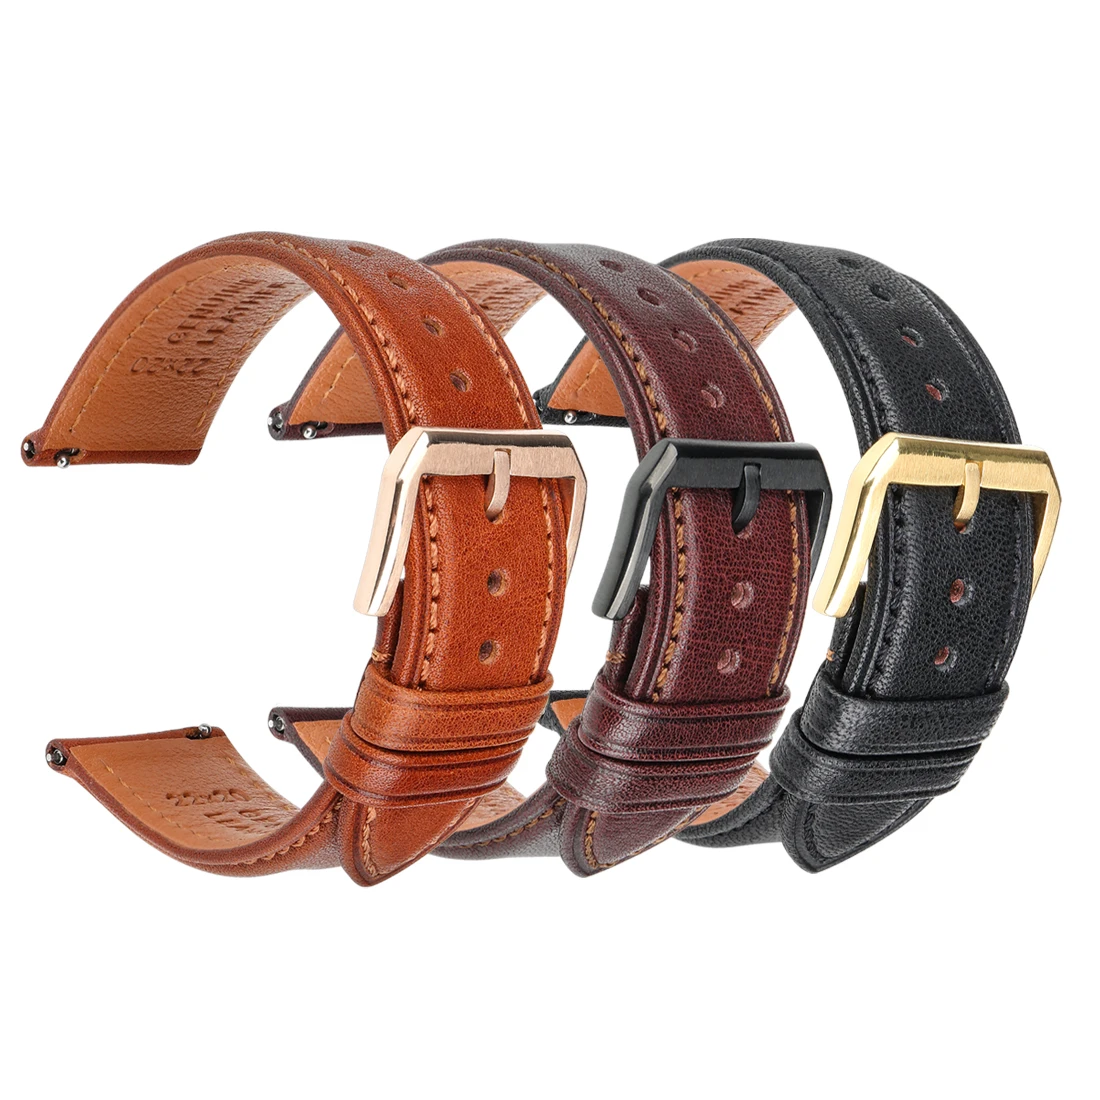 

Handmade Quick Release Leather Watch Strap 18mm 20mm 22mm Black Brown Watchbands Genuine Italian Calf Leather Watch Band Belt